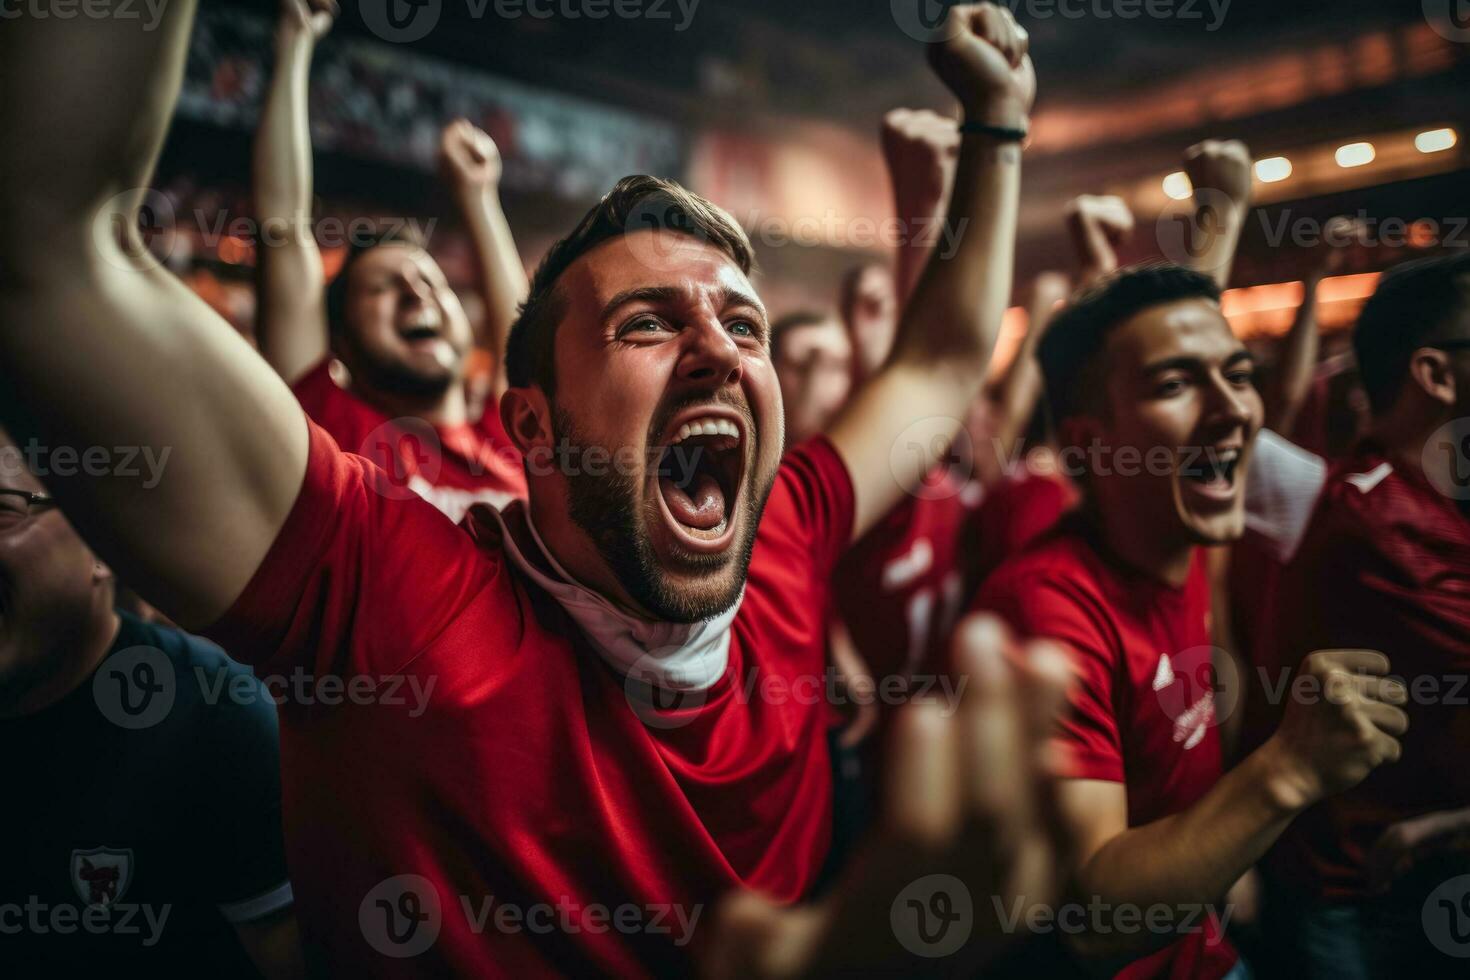 American football fans celebrating a victory photo